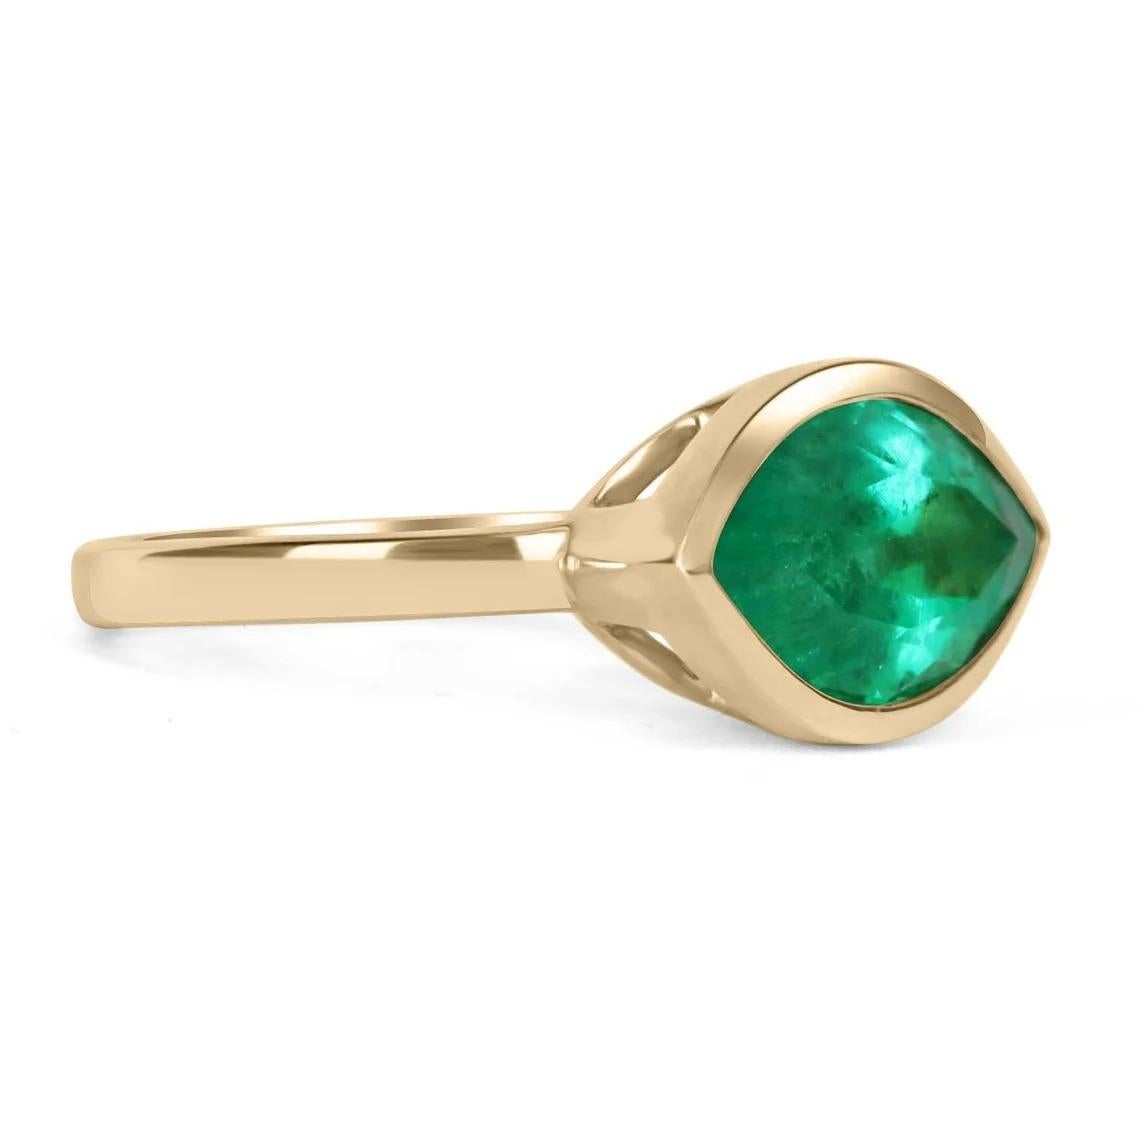 Displayed is a stunning Colombian emerald, marquise cut, solitaire ring. This custom piece is extremely unique, as having emeralds cut in these rare shapes is very uncommon. This natural emerald marquise showcases gorgeous medium green color and